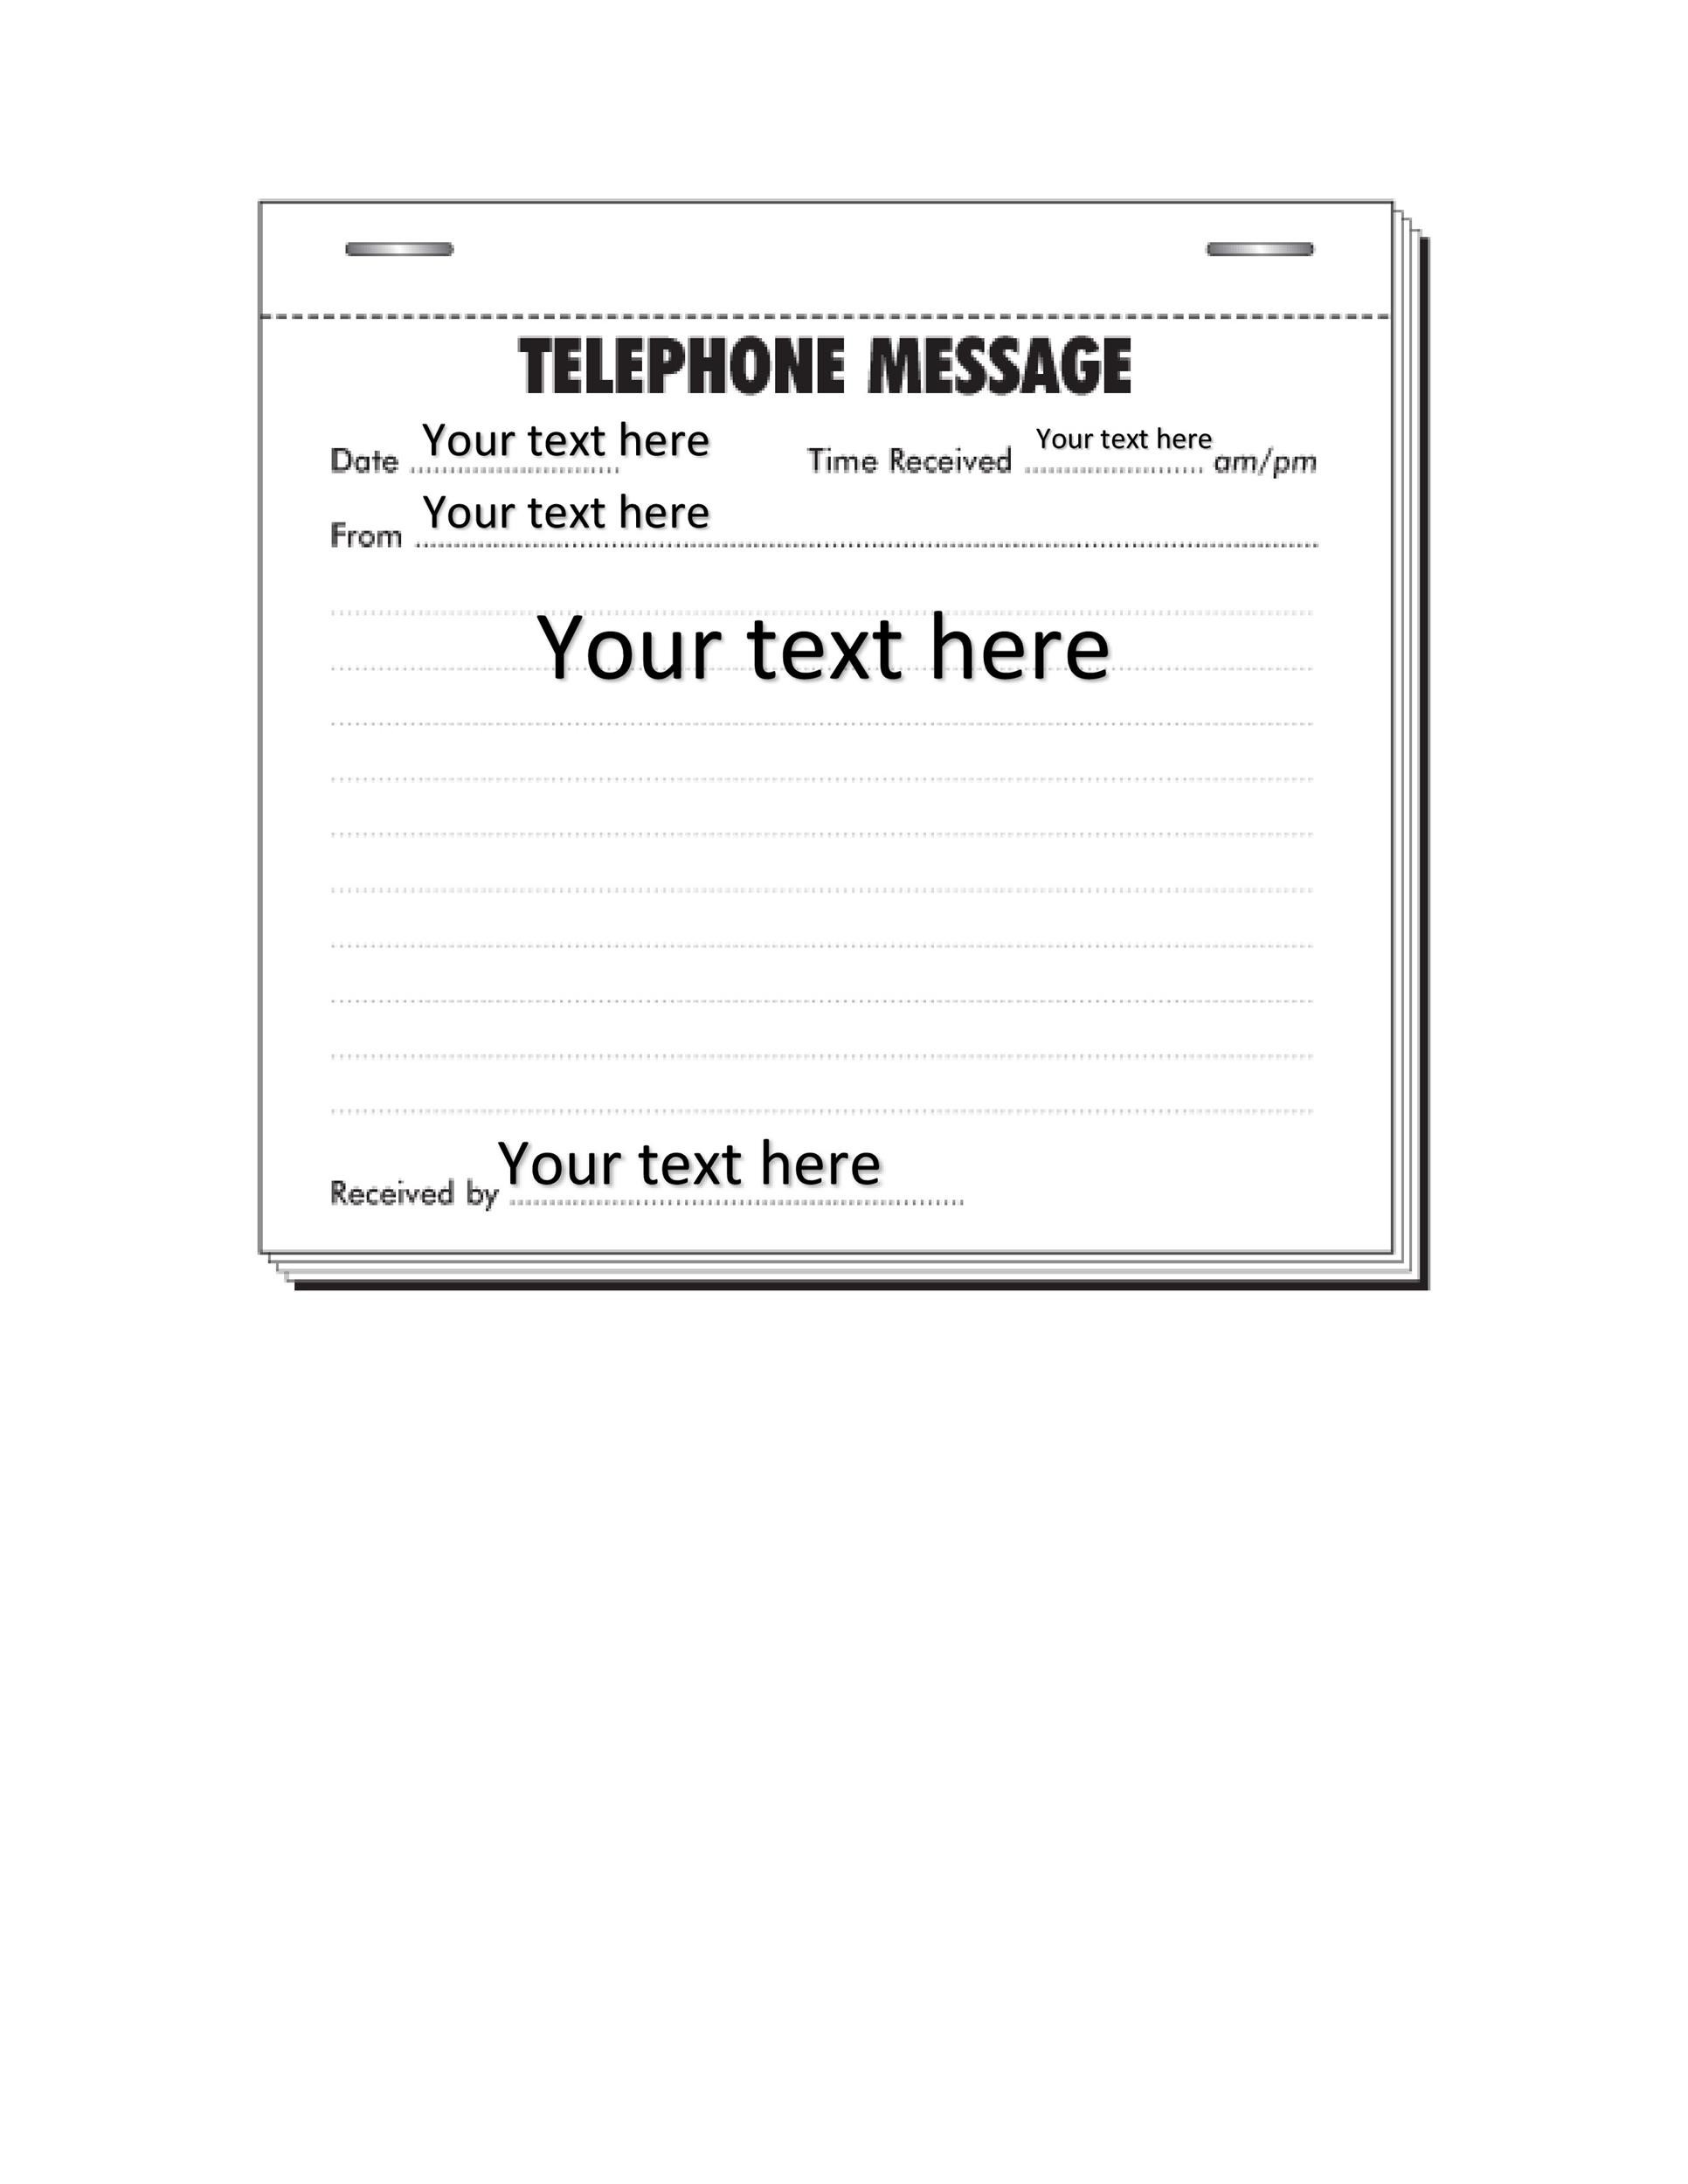 Free phone message template 16